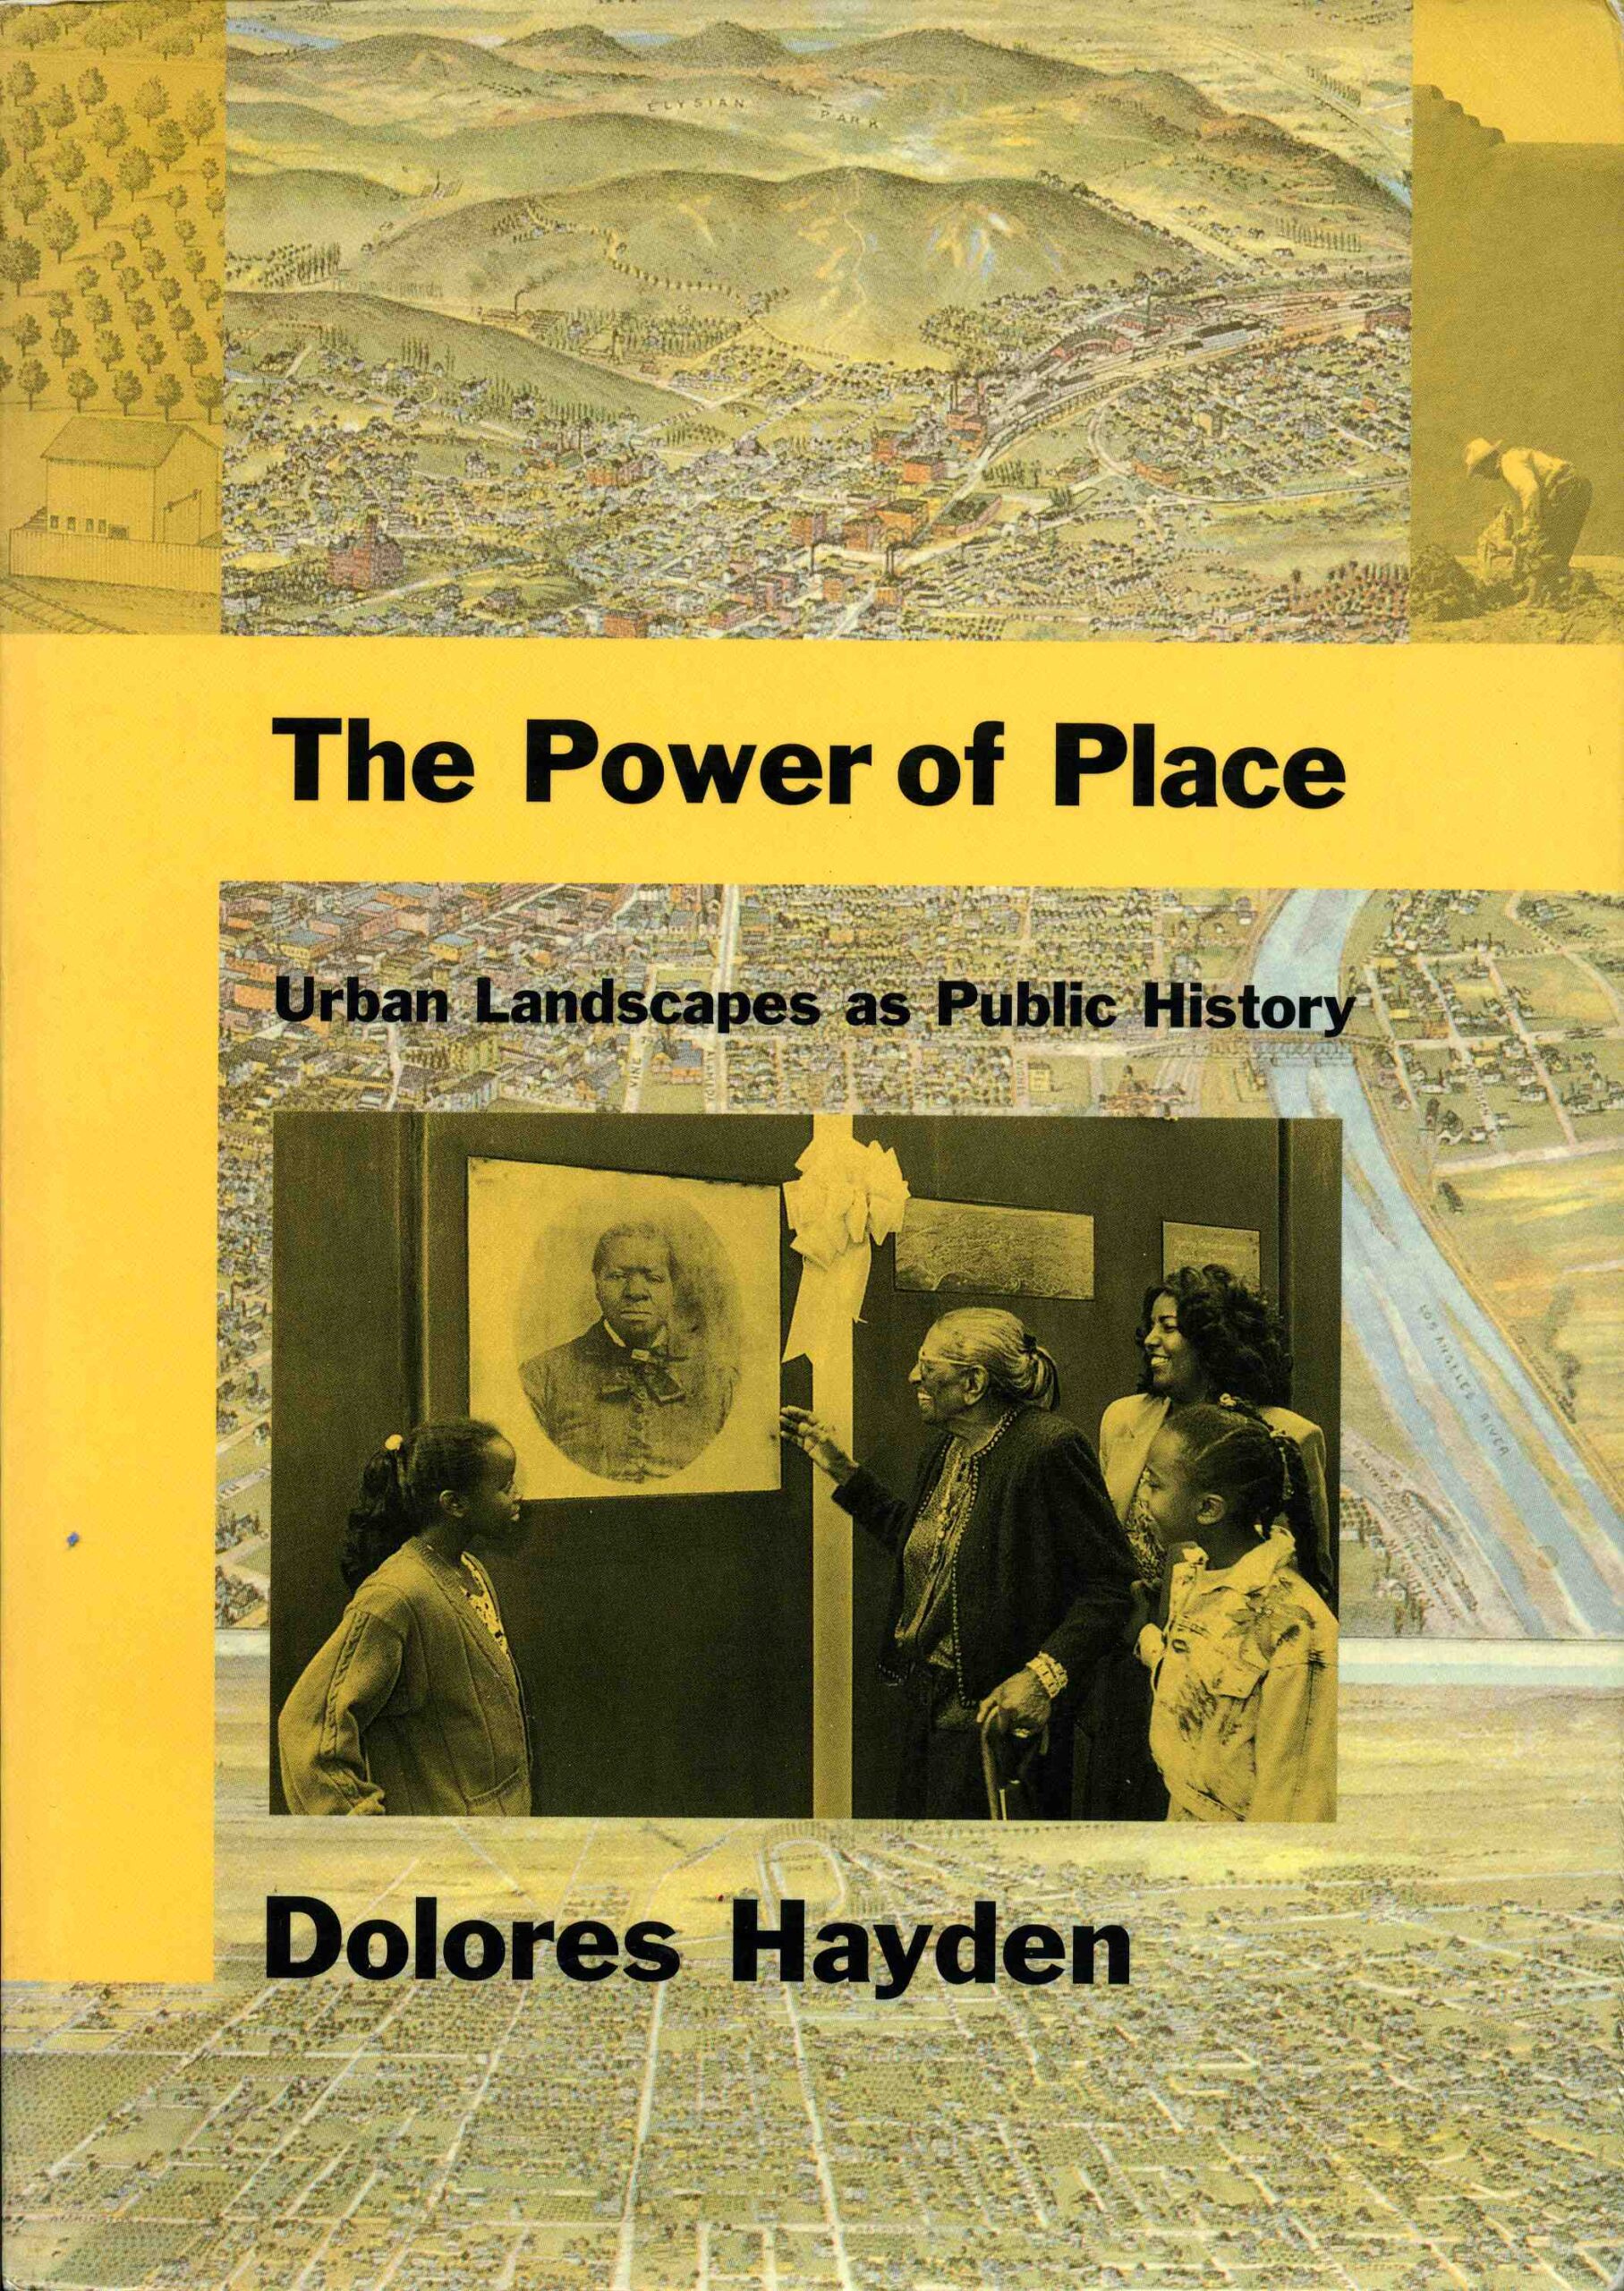 This book the Power of Place is an excellent example of combining history, social issues and urban spaces